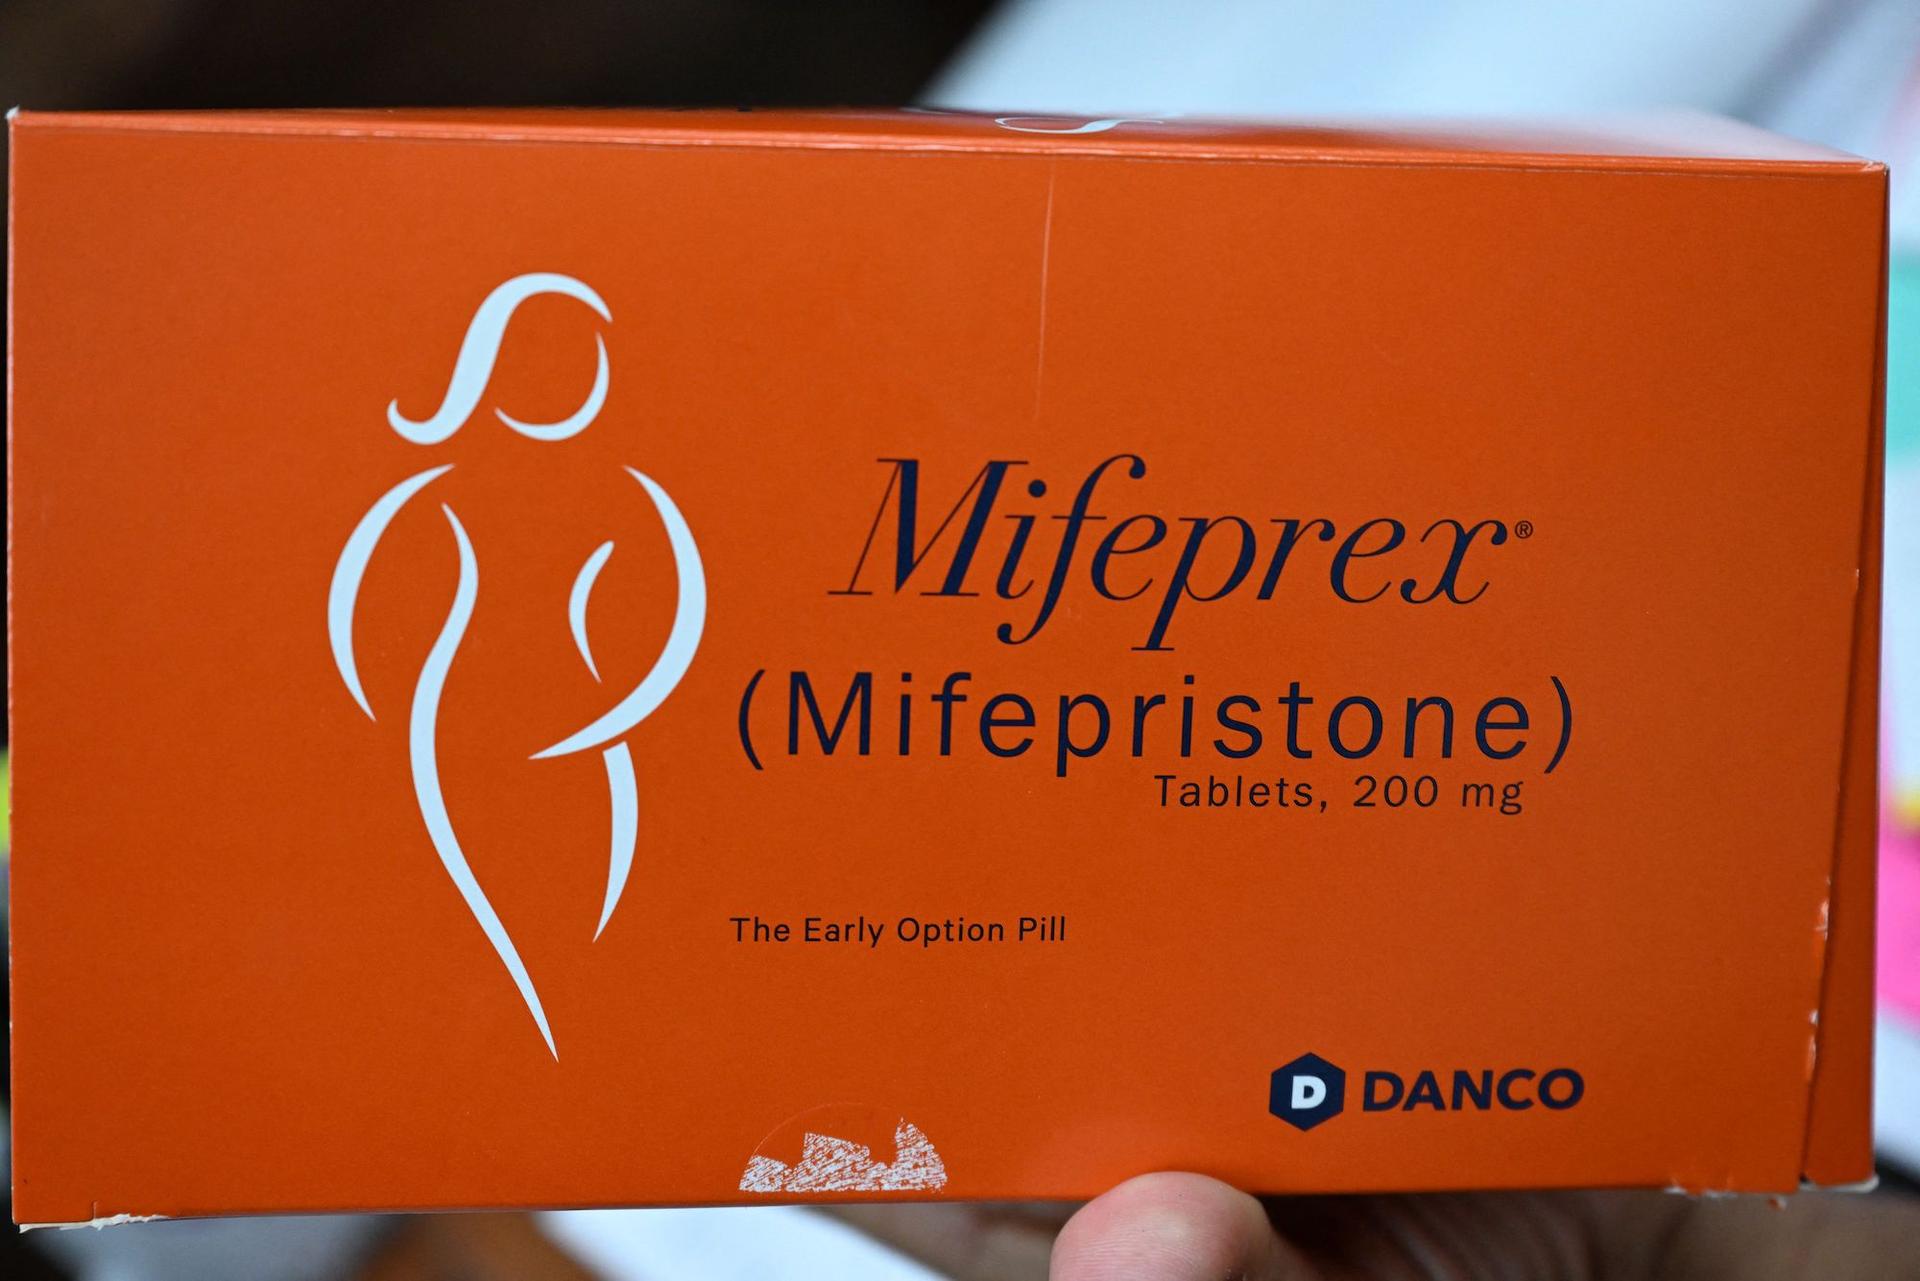 Mifepristone (Mifeprex), one of the two drugs used in a medication abortion, is displayed at the Women's Reproductive Clinic in Santa Teresa, N.M., on June 15, 2022. (Robyn Beck/AFP via Getty Images)